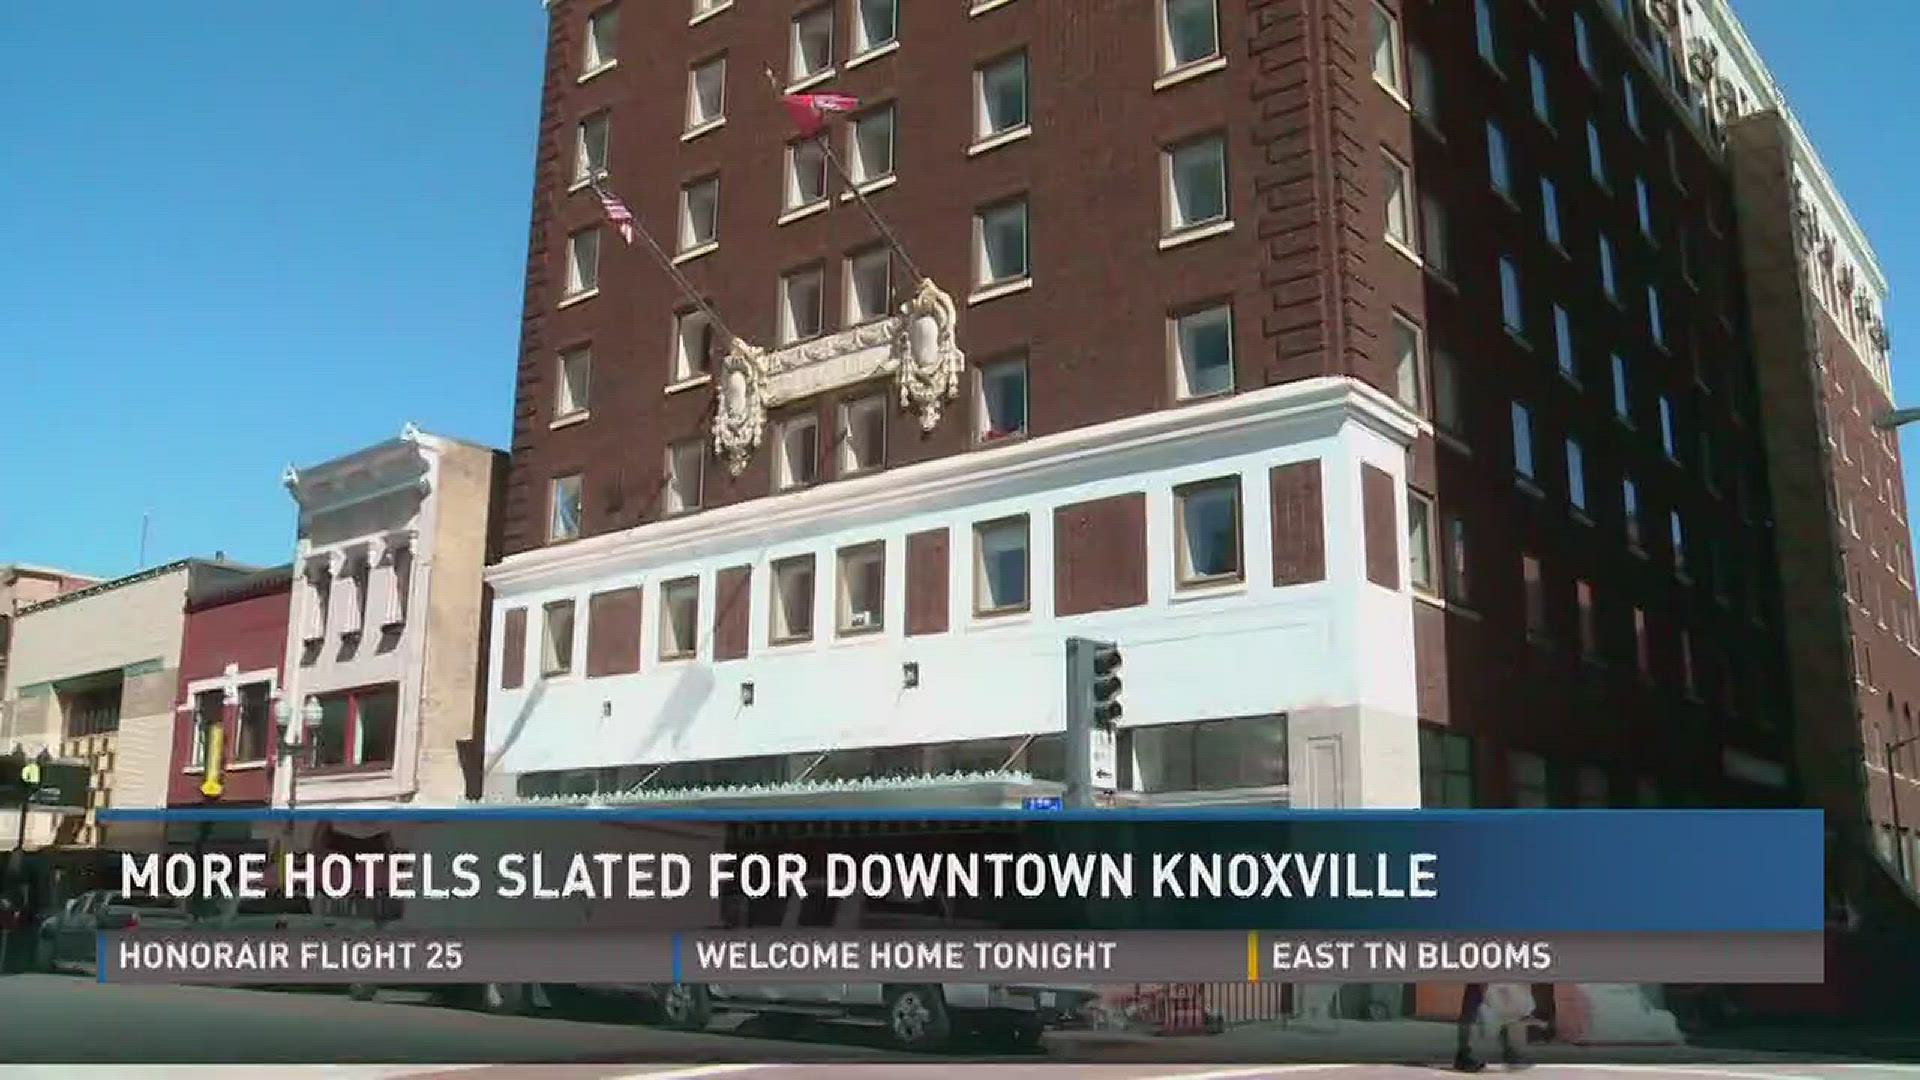 The Andrew Johnson building in downtown Knoxville could soon become a hotel.